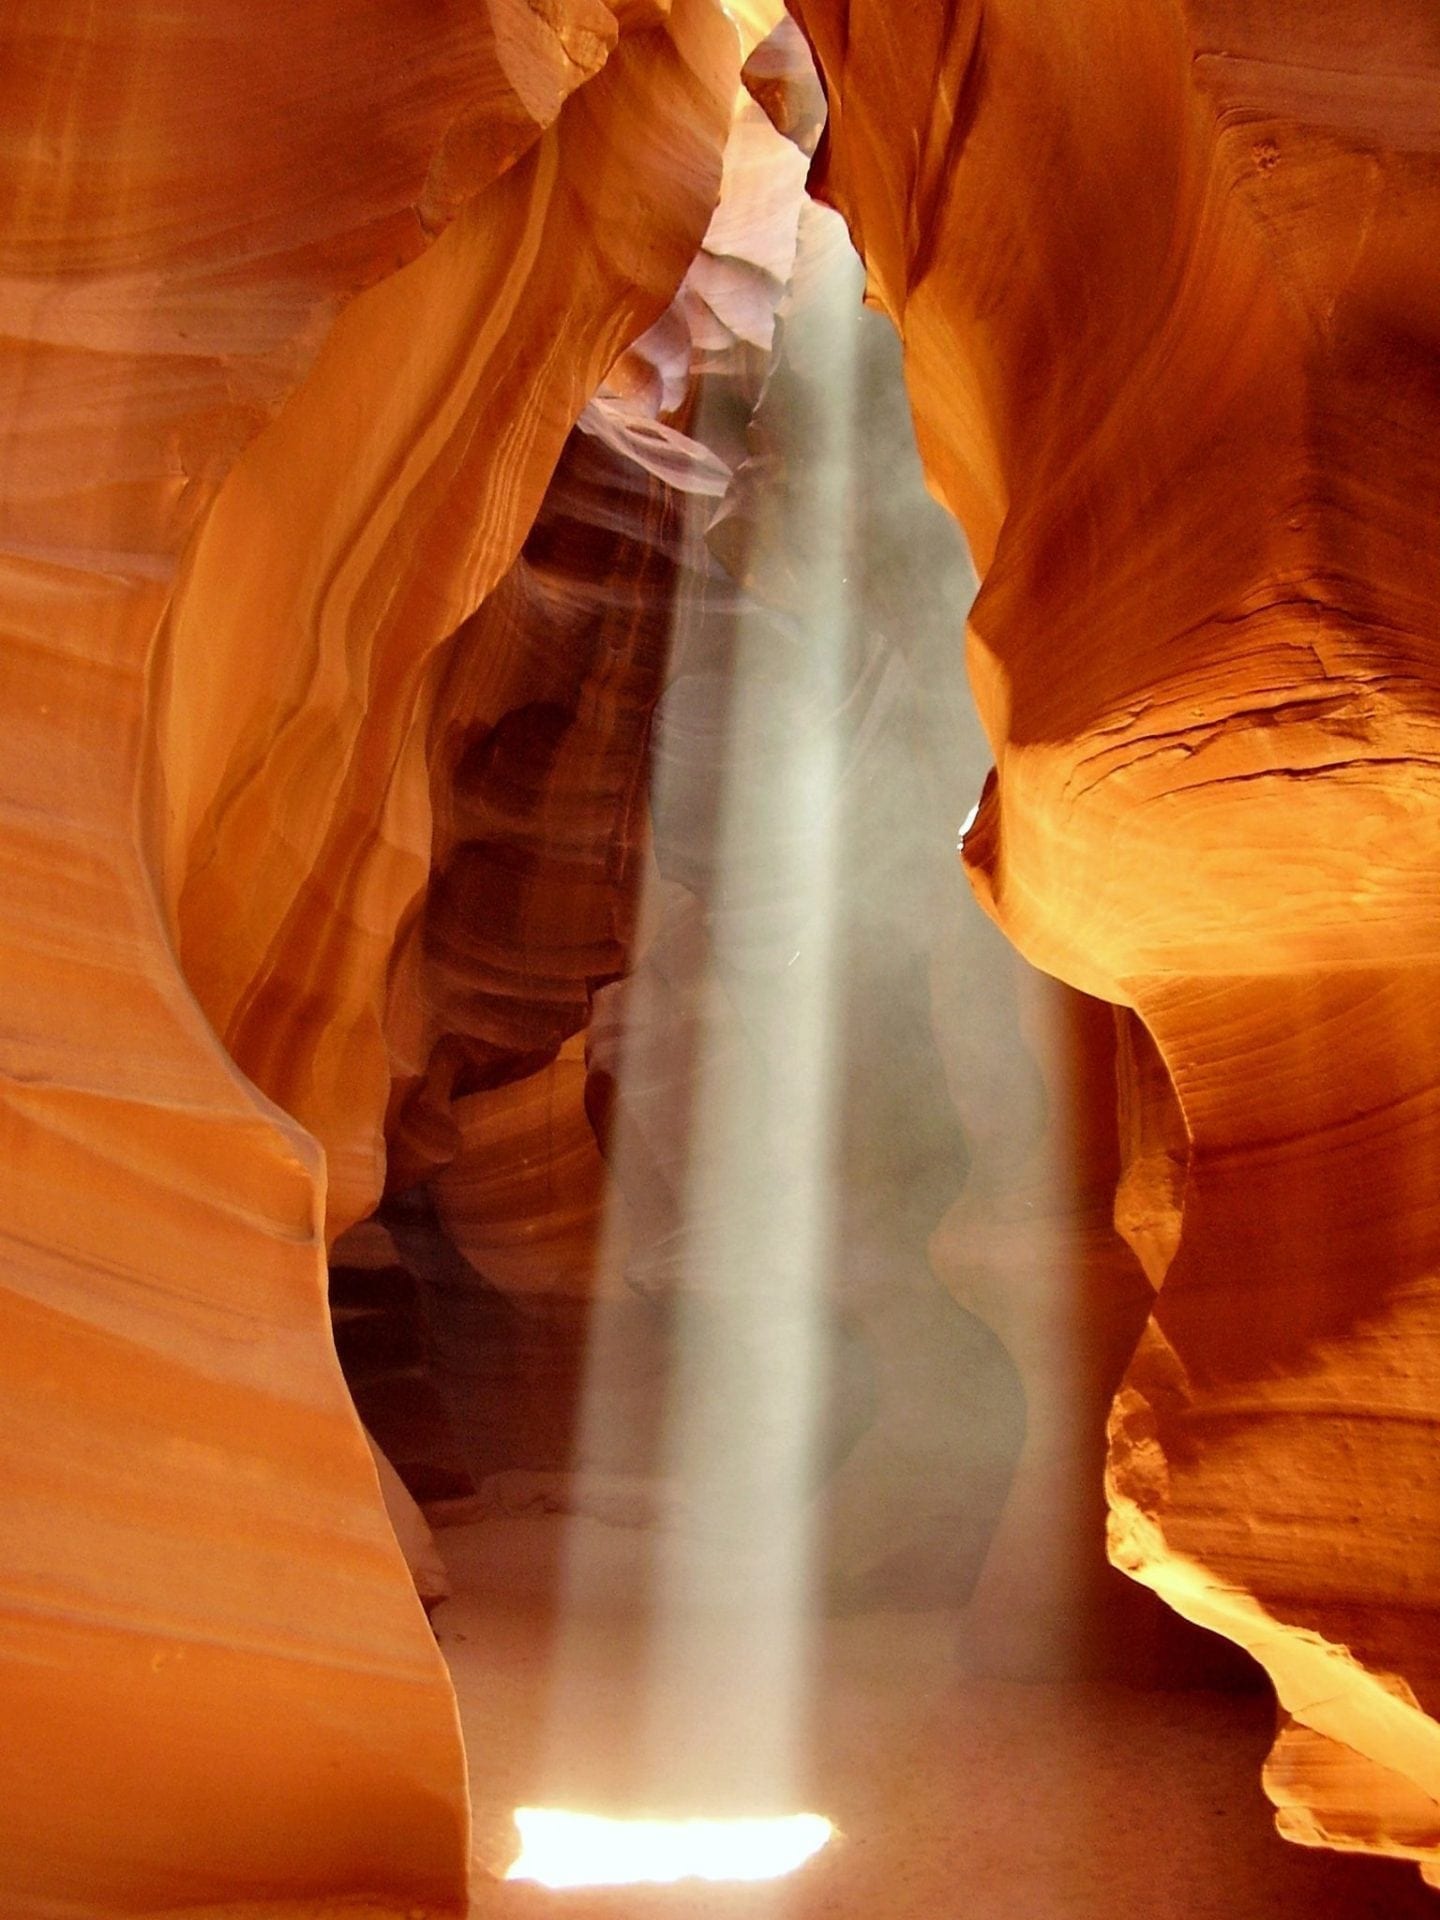 Antelope Canyon is a gorgeous slot canyon that will leave you breathless with it’s combination of extreme beauty, rock color, and bouncing ambient light that cauterizes into picture-perfect snaps.